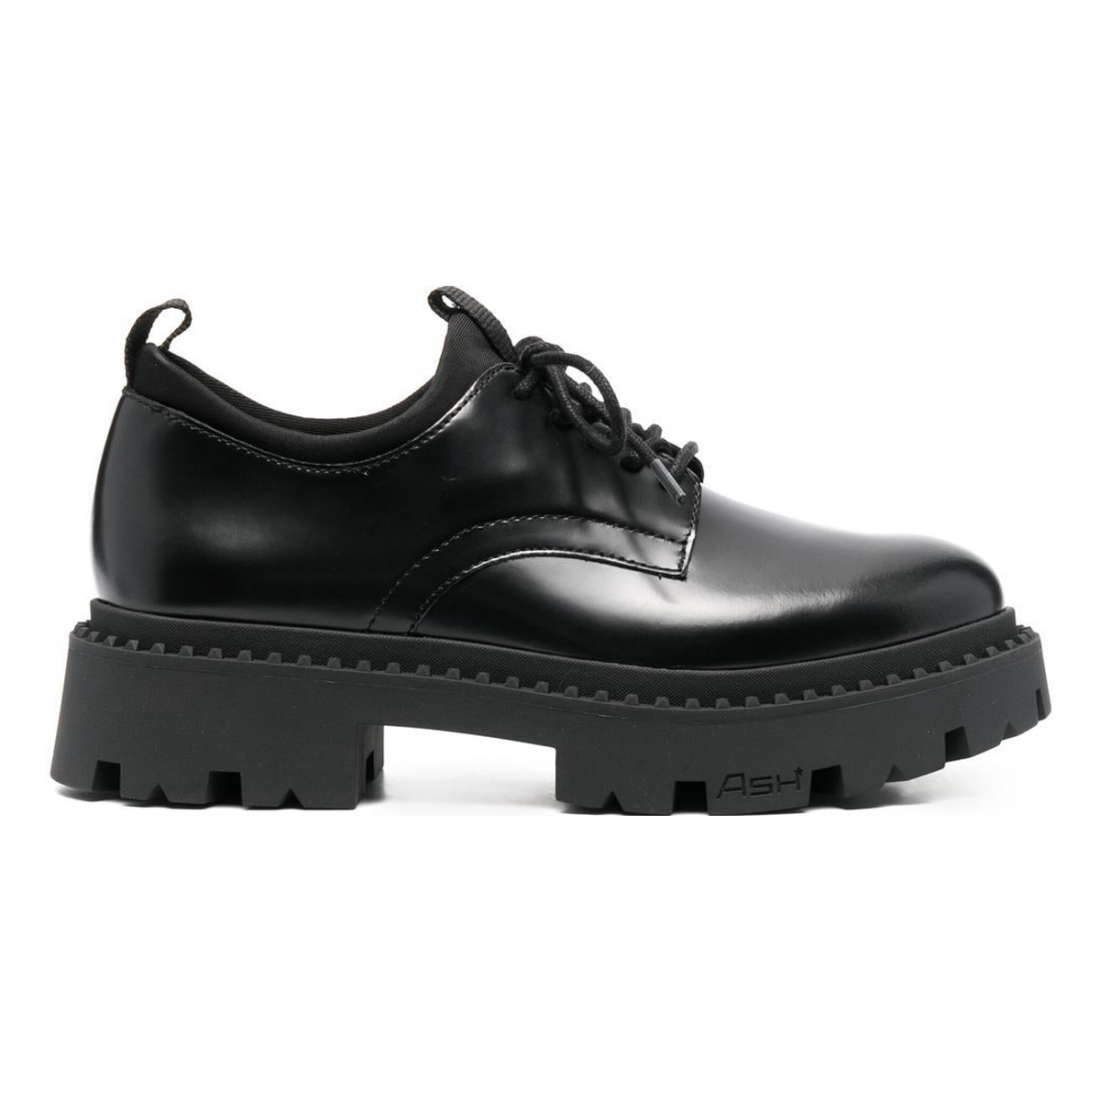 Women's 'Giant Chunky' Lace-Up Shoes